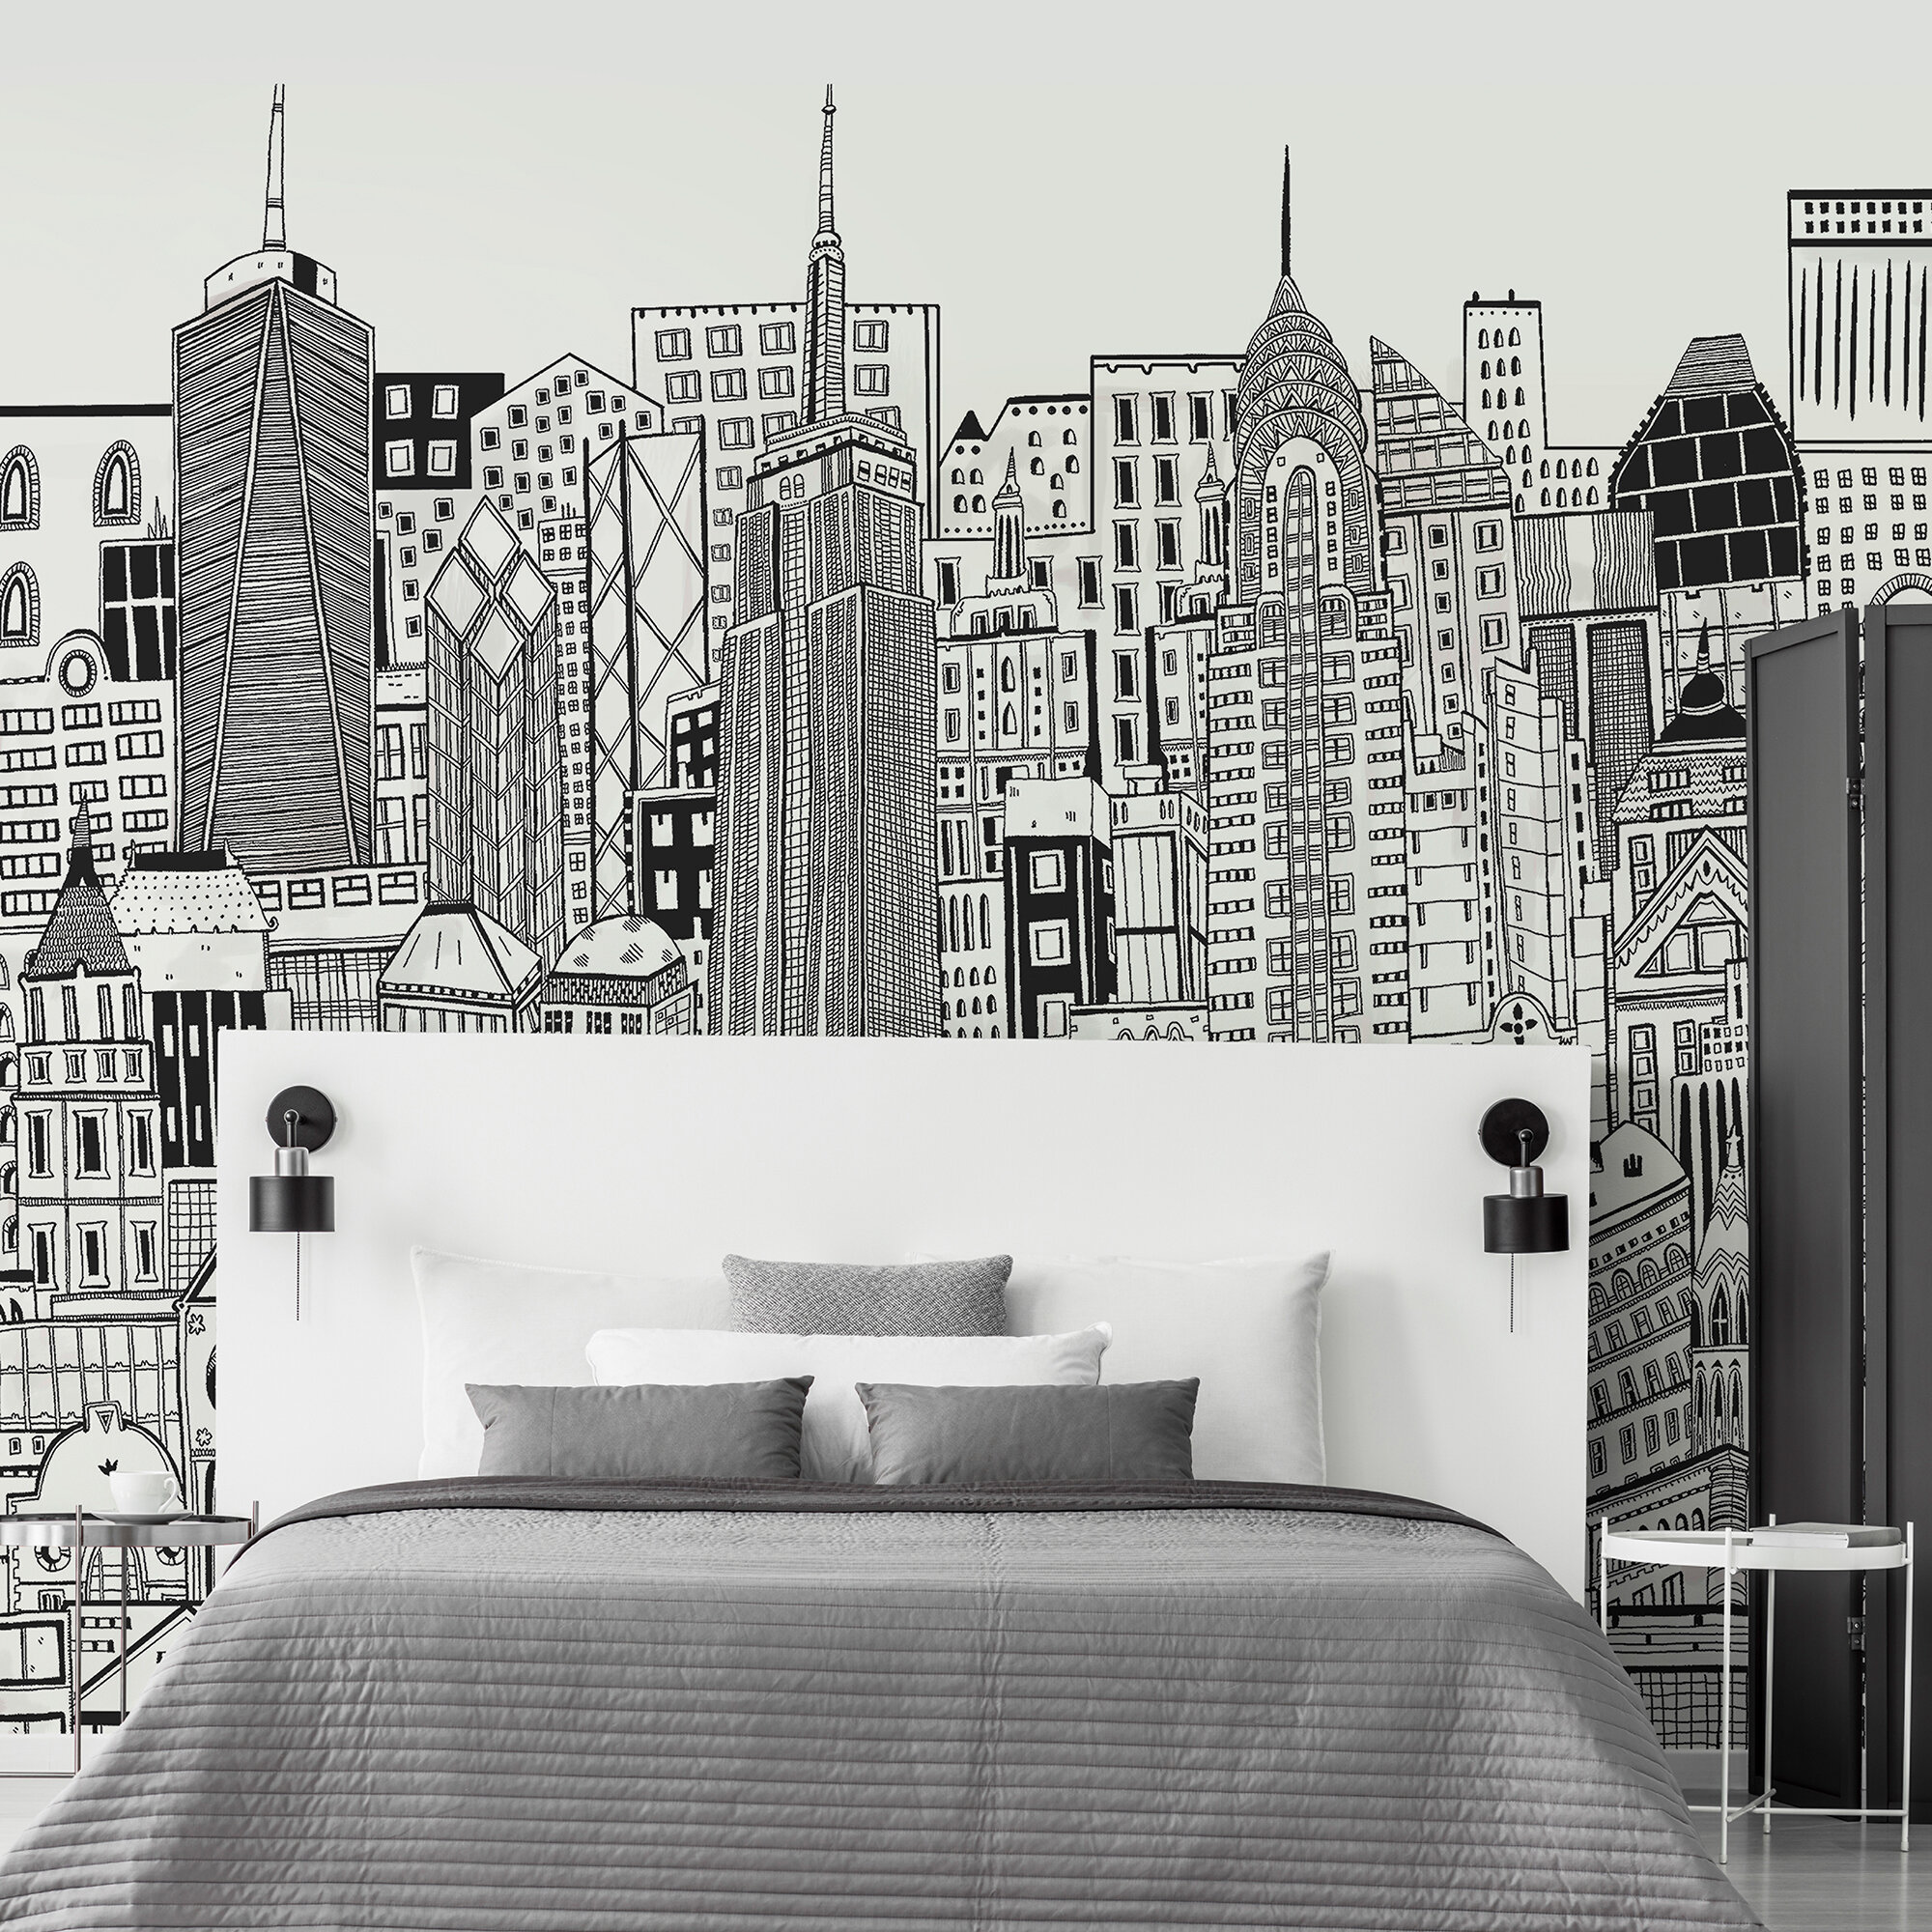 Art for the Home In the City Monochrome Cityscape Wall Mural